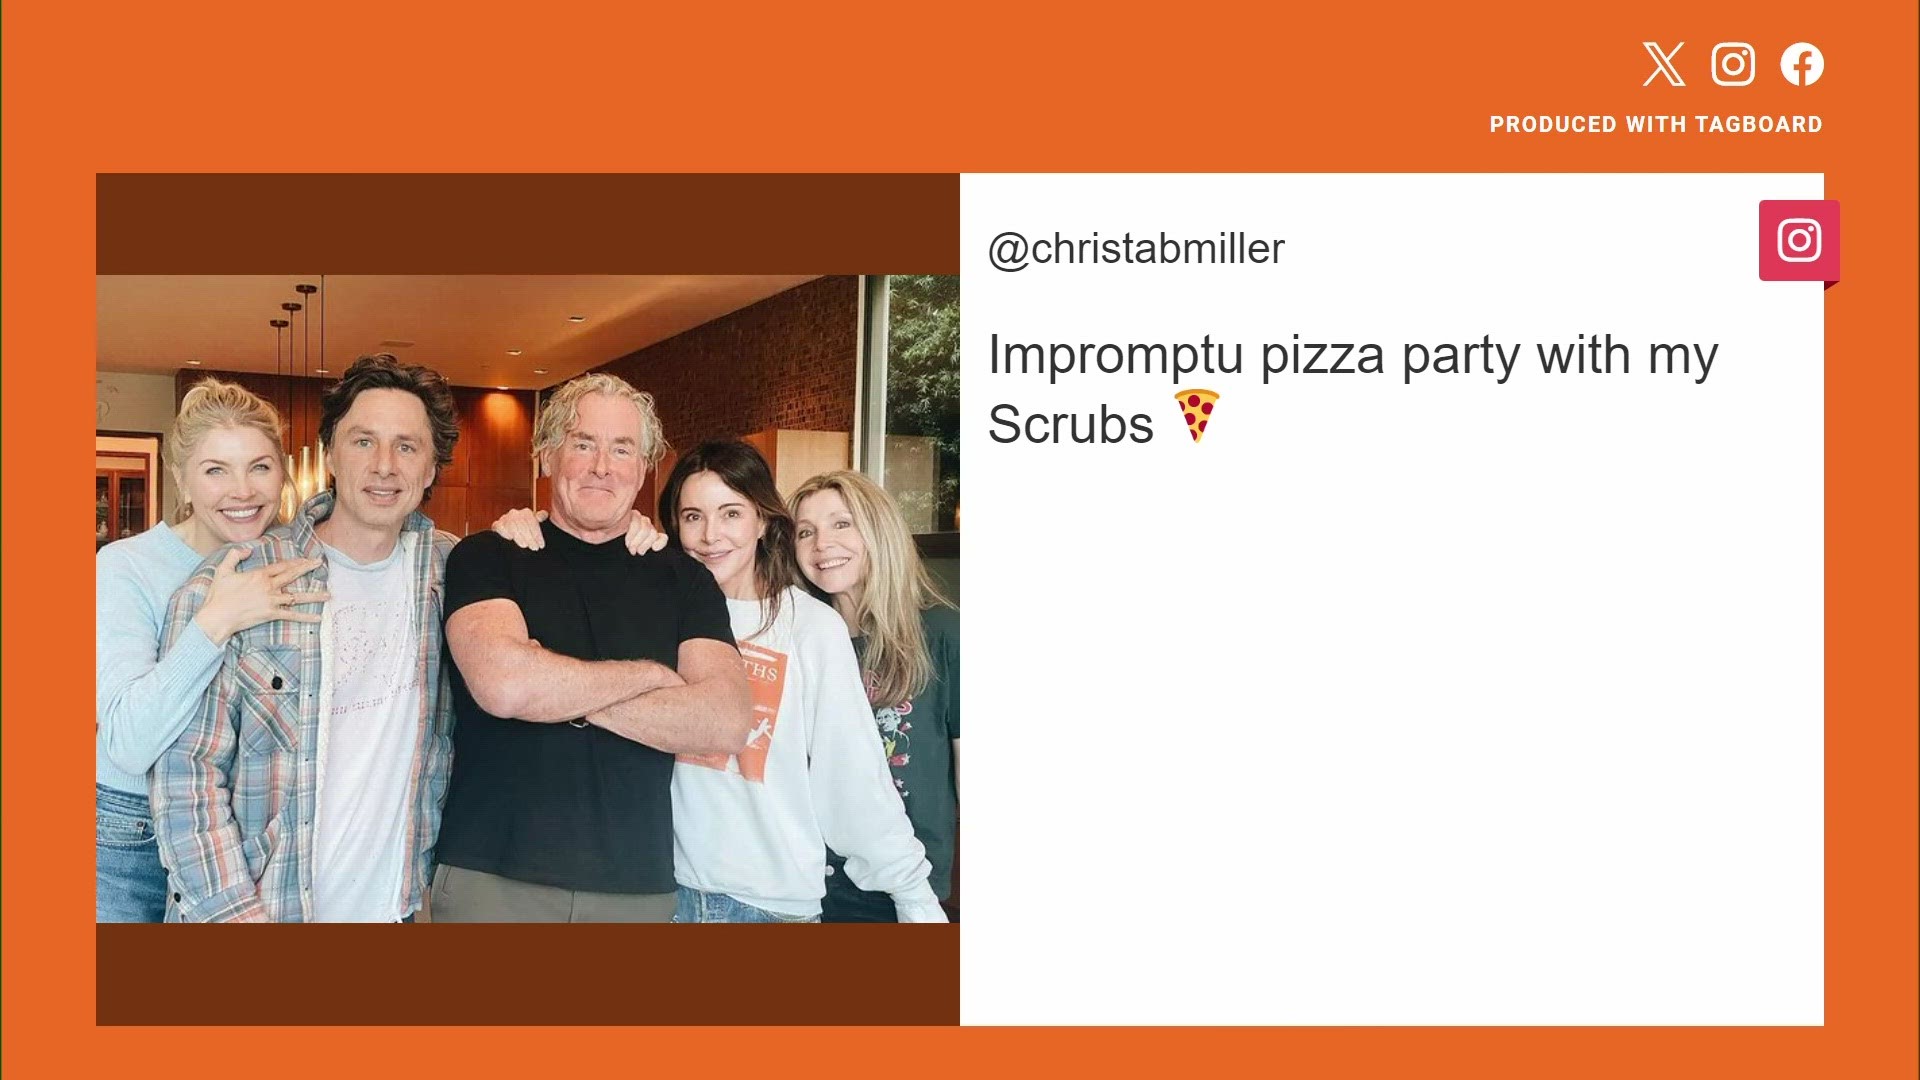 Christa Miller, John C. McGinley, Zach Braff, Sarah Chalke and Amanda Kloots posed for a photo during an "impromptu pizza party."